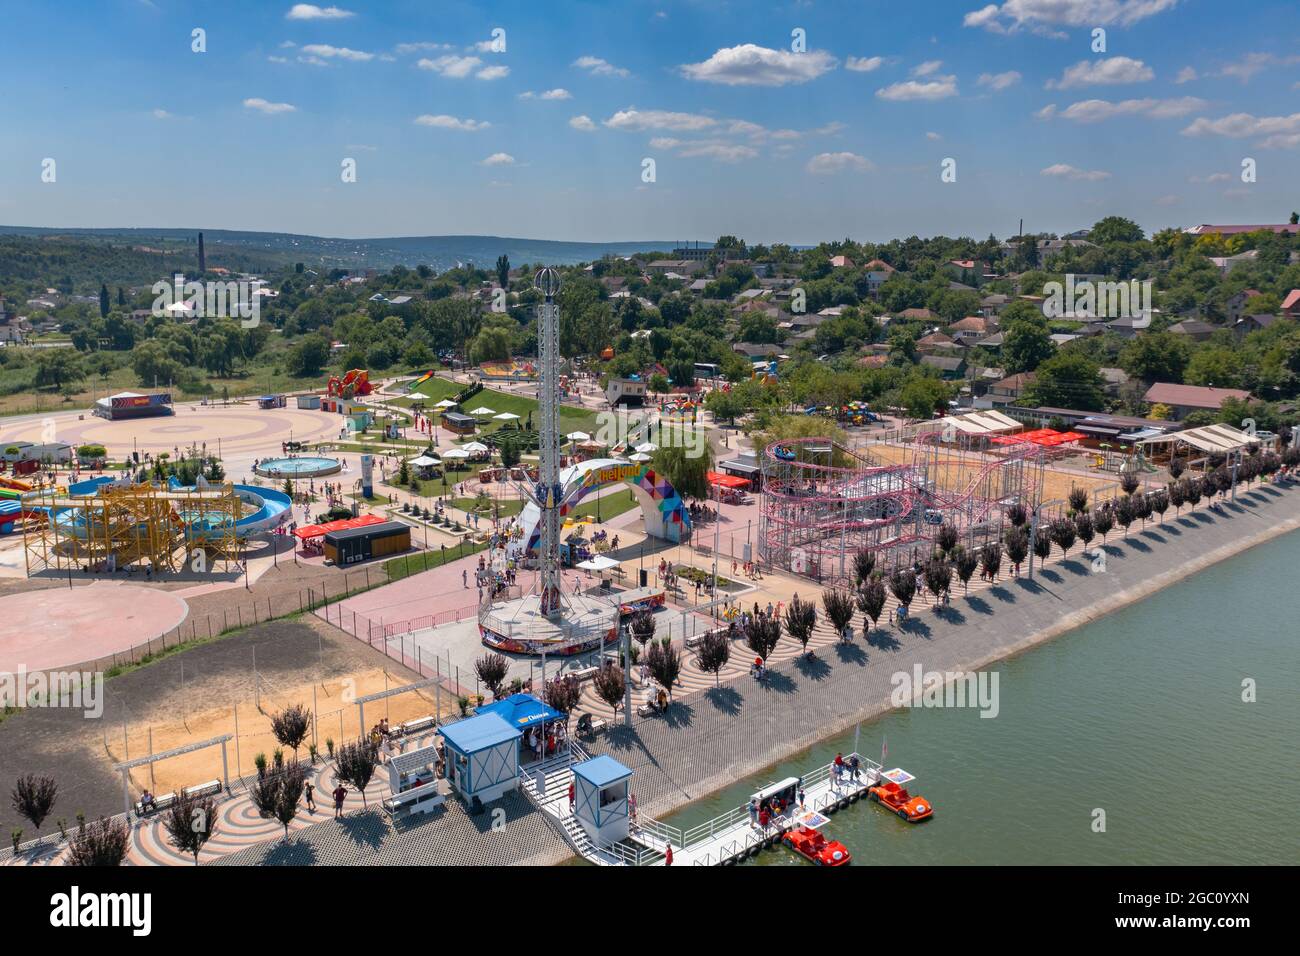 Aerial view of the amusement park Orheiland Stock Photo